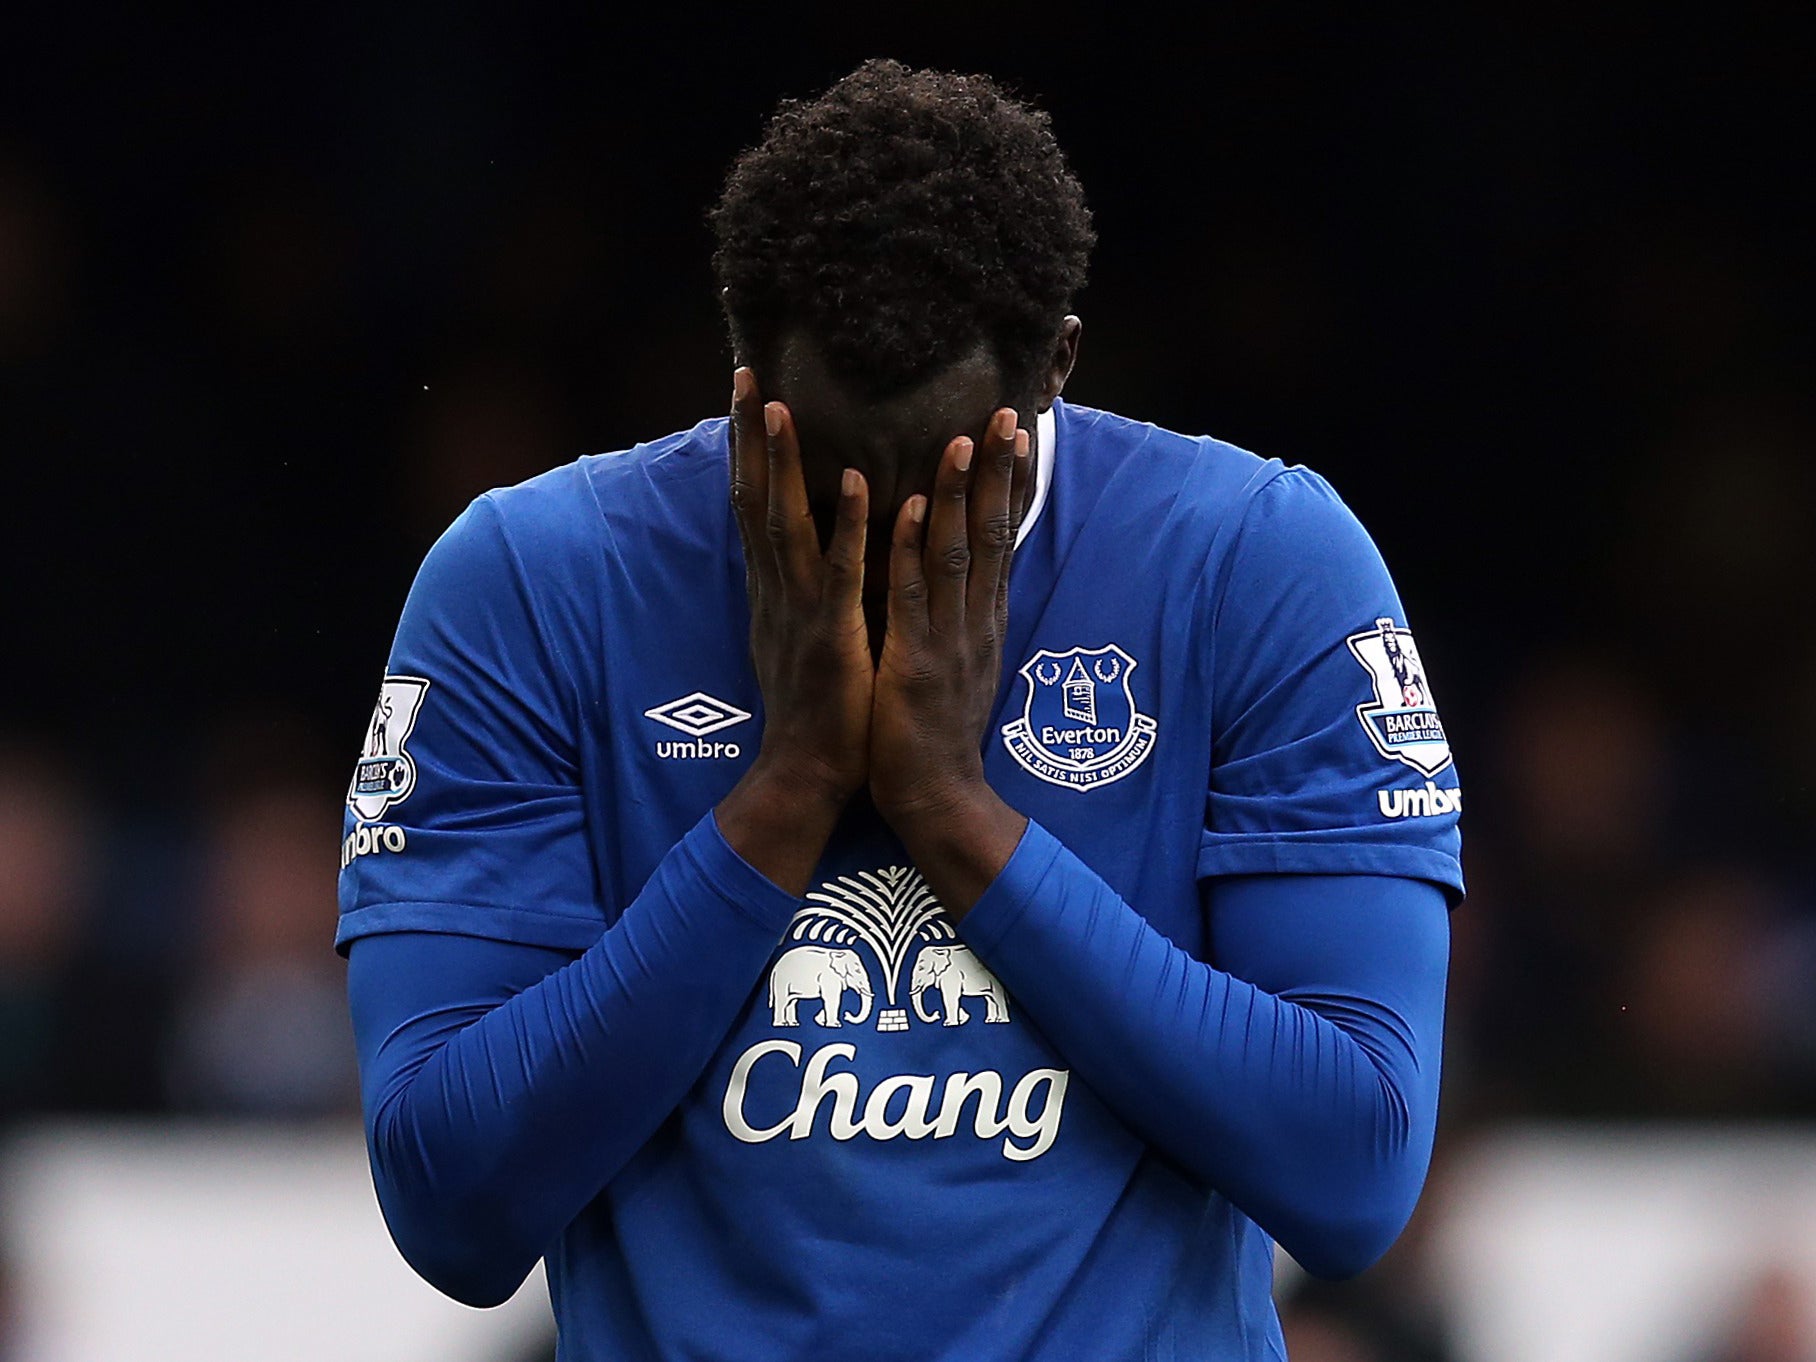 Lukaku has told Everton that he wants to leave the club this summer